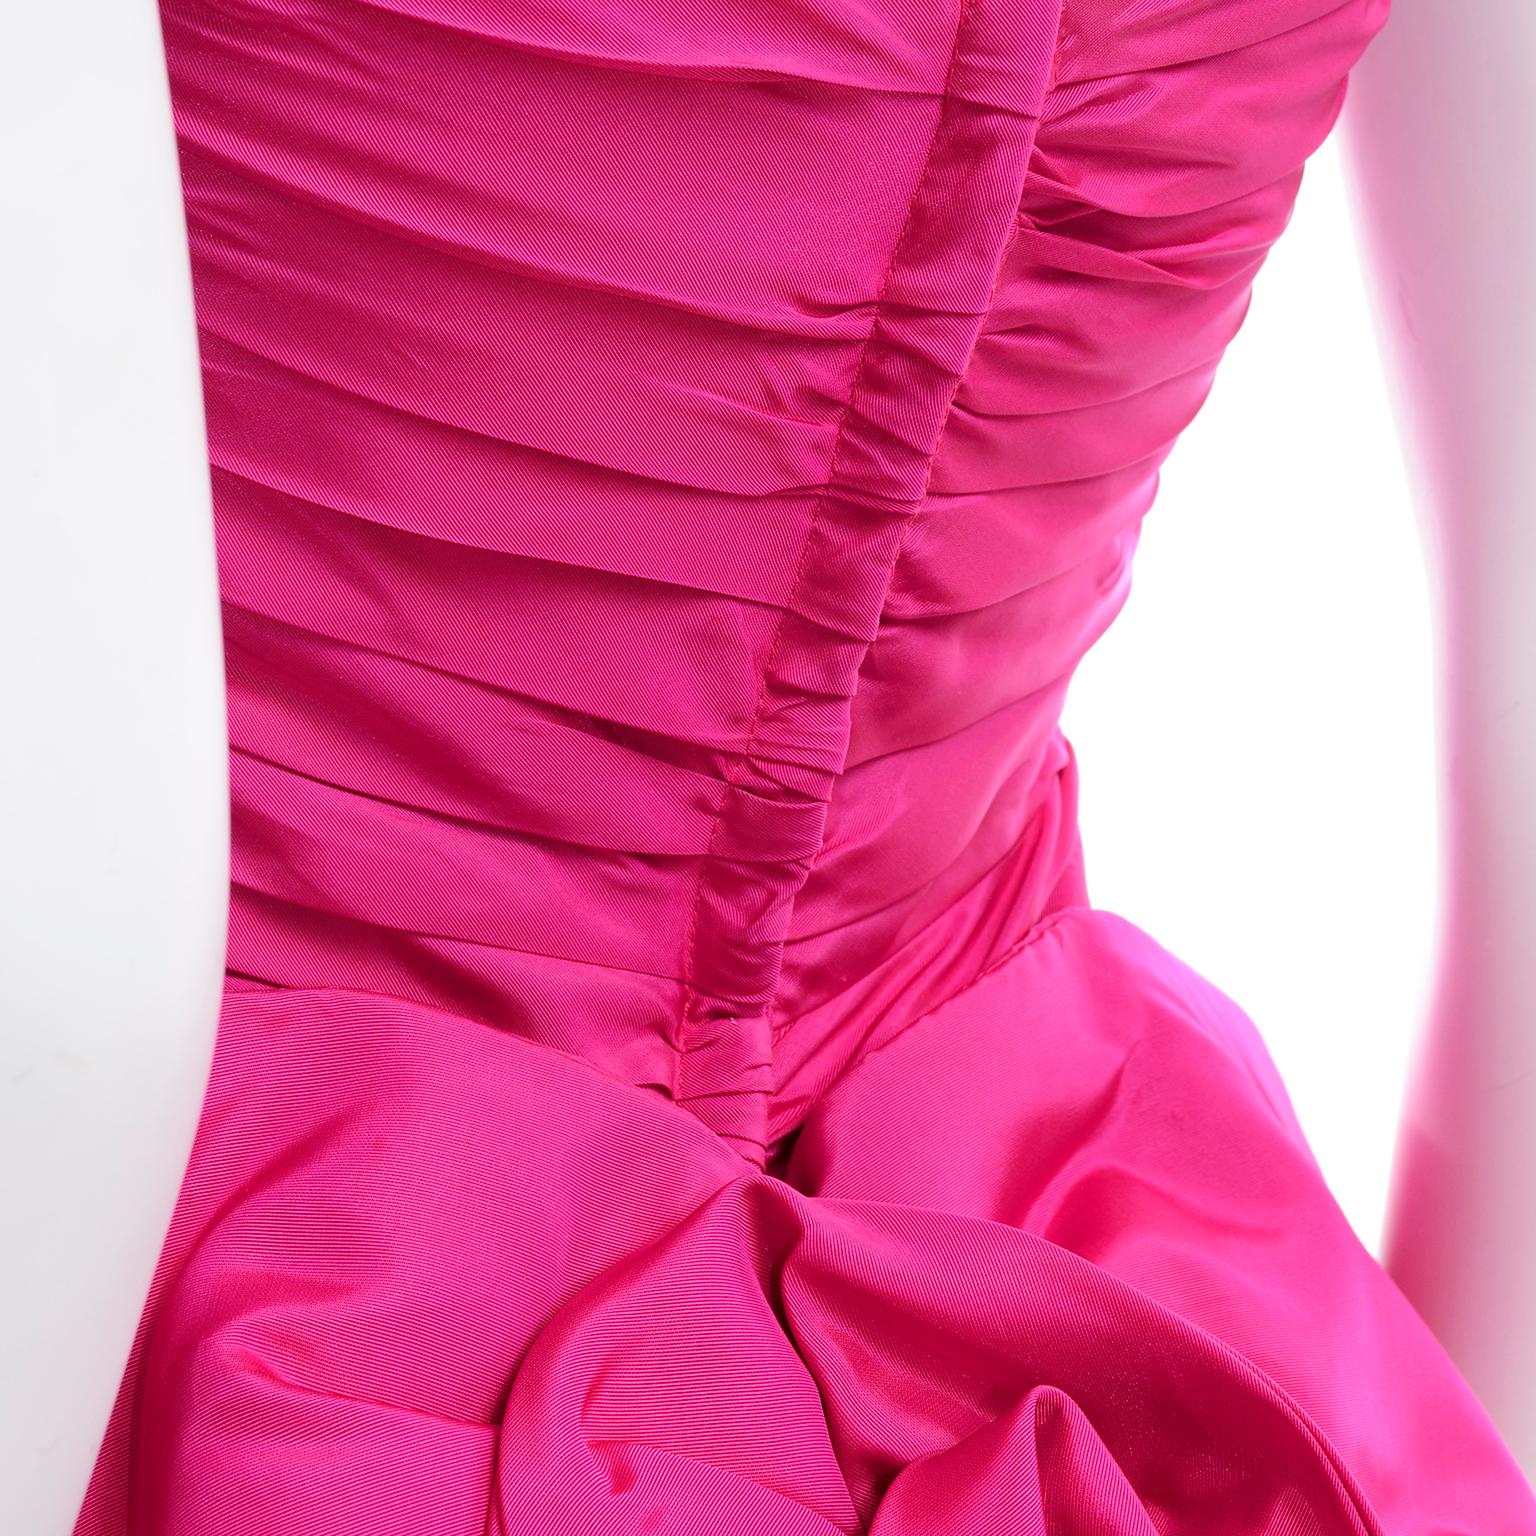 1980s Bright Pink Strapless Vintage Evening Dress With Giant Bow & Ruching 3